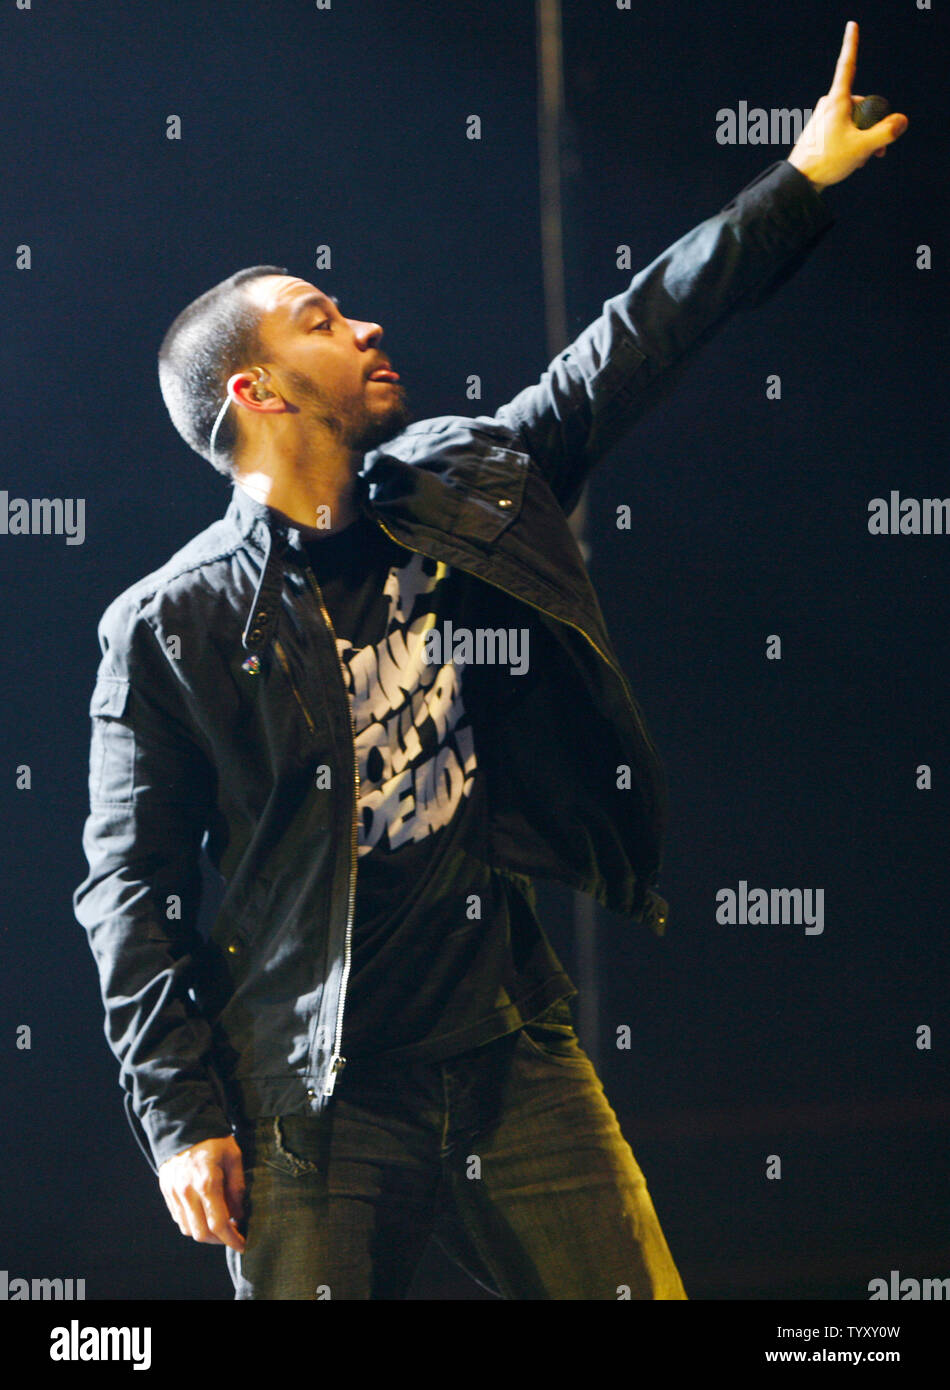 Mike Shinoda of the band Linkin Park performs in concert at Bercy in Paris on May 30, 2007.   (UPI Photo/David Silpa) Stock Photo